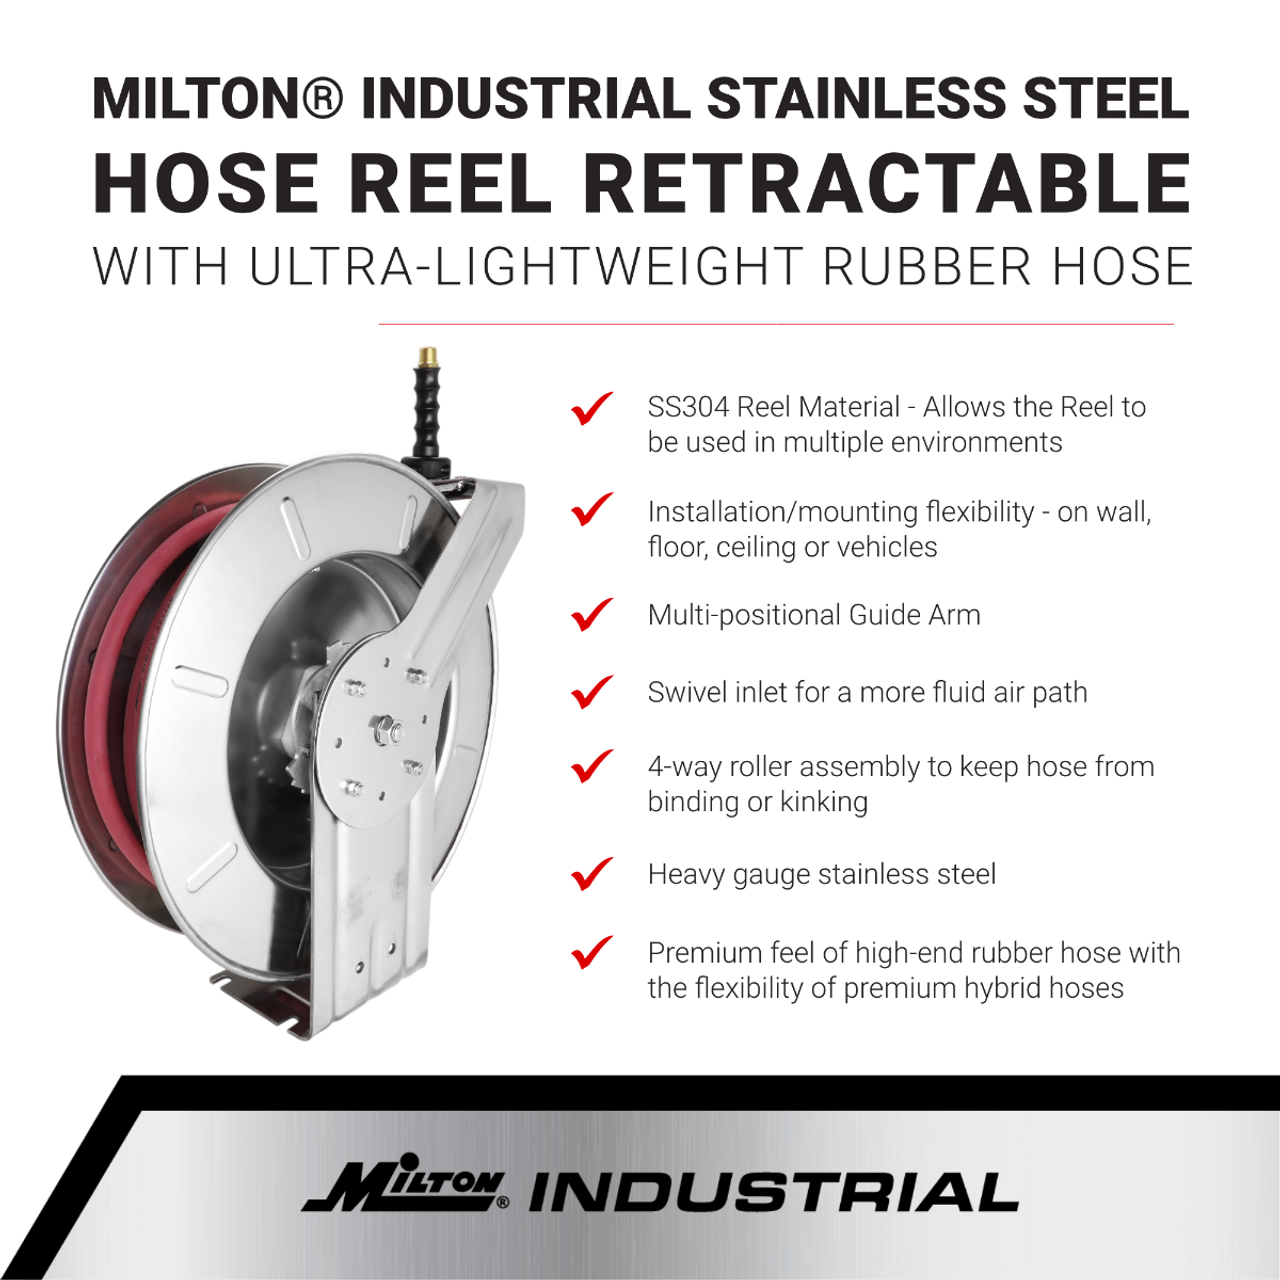 Milton? Industrial Stainless Steel Hose Reel Retractable, 3/8" ID x 50' Ultra-Lightweight Rubber hose w/ 3/8" NPT, 300 PSI